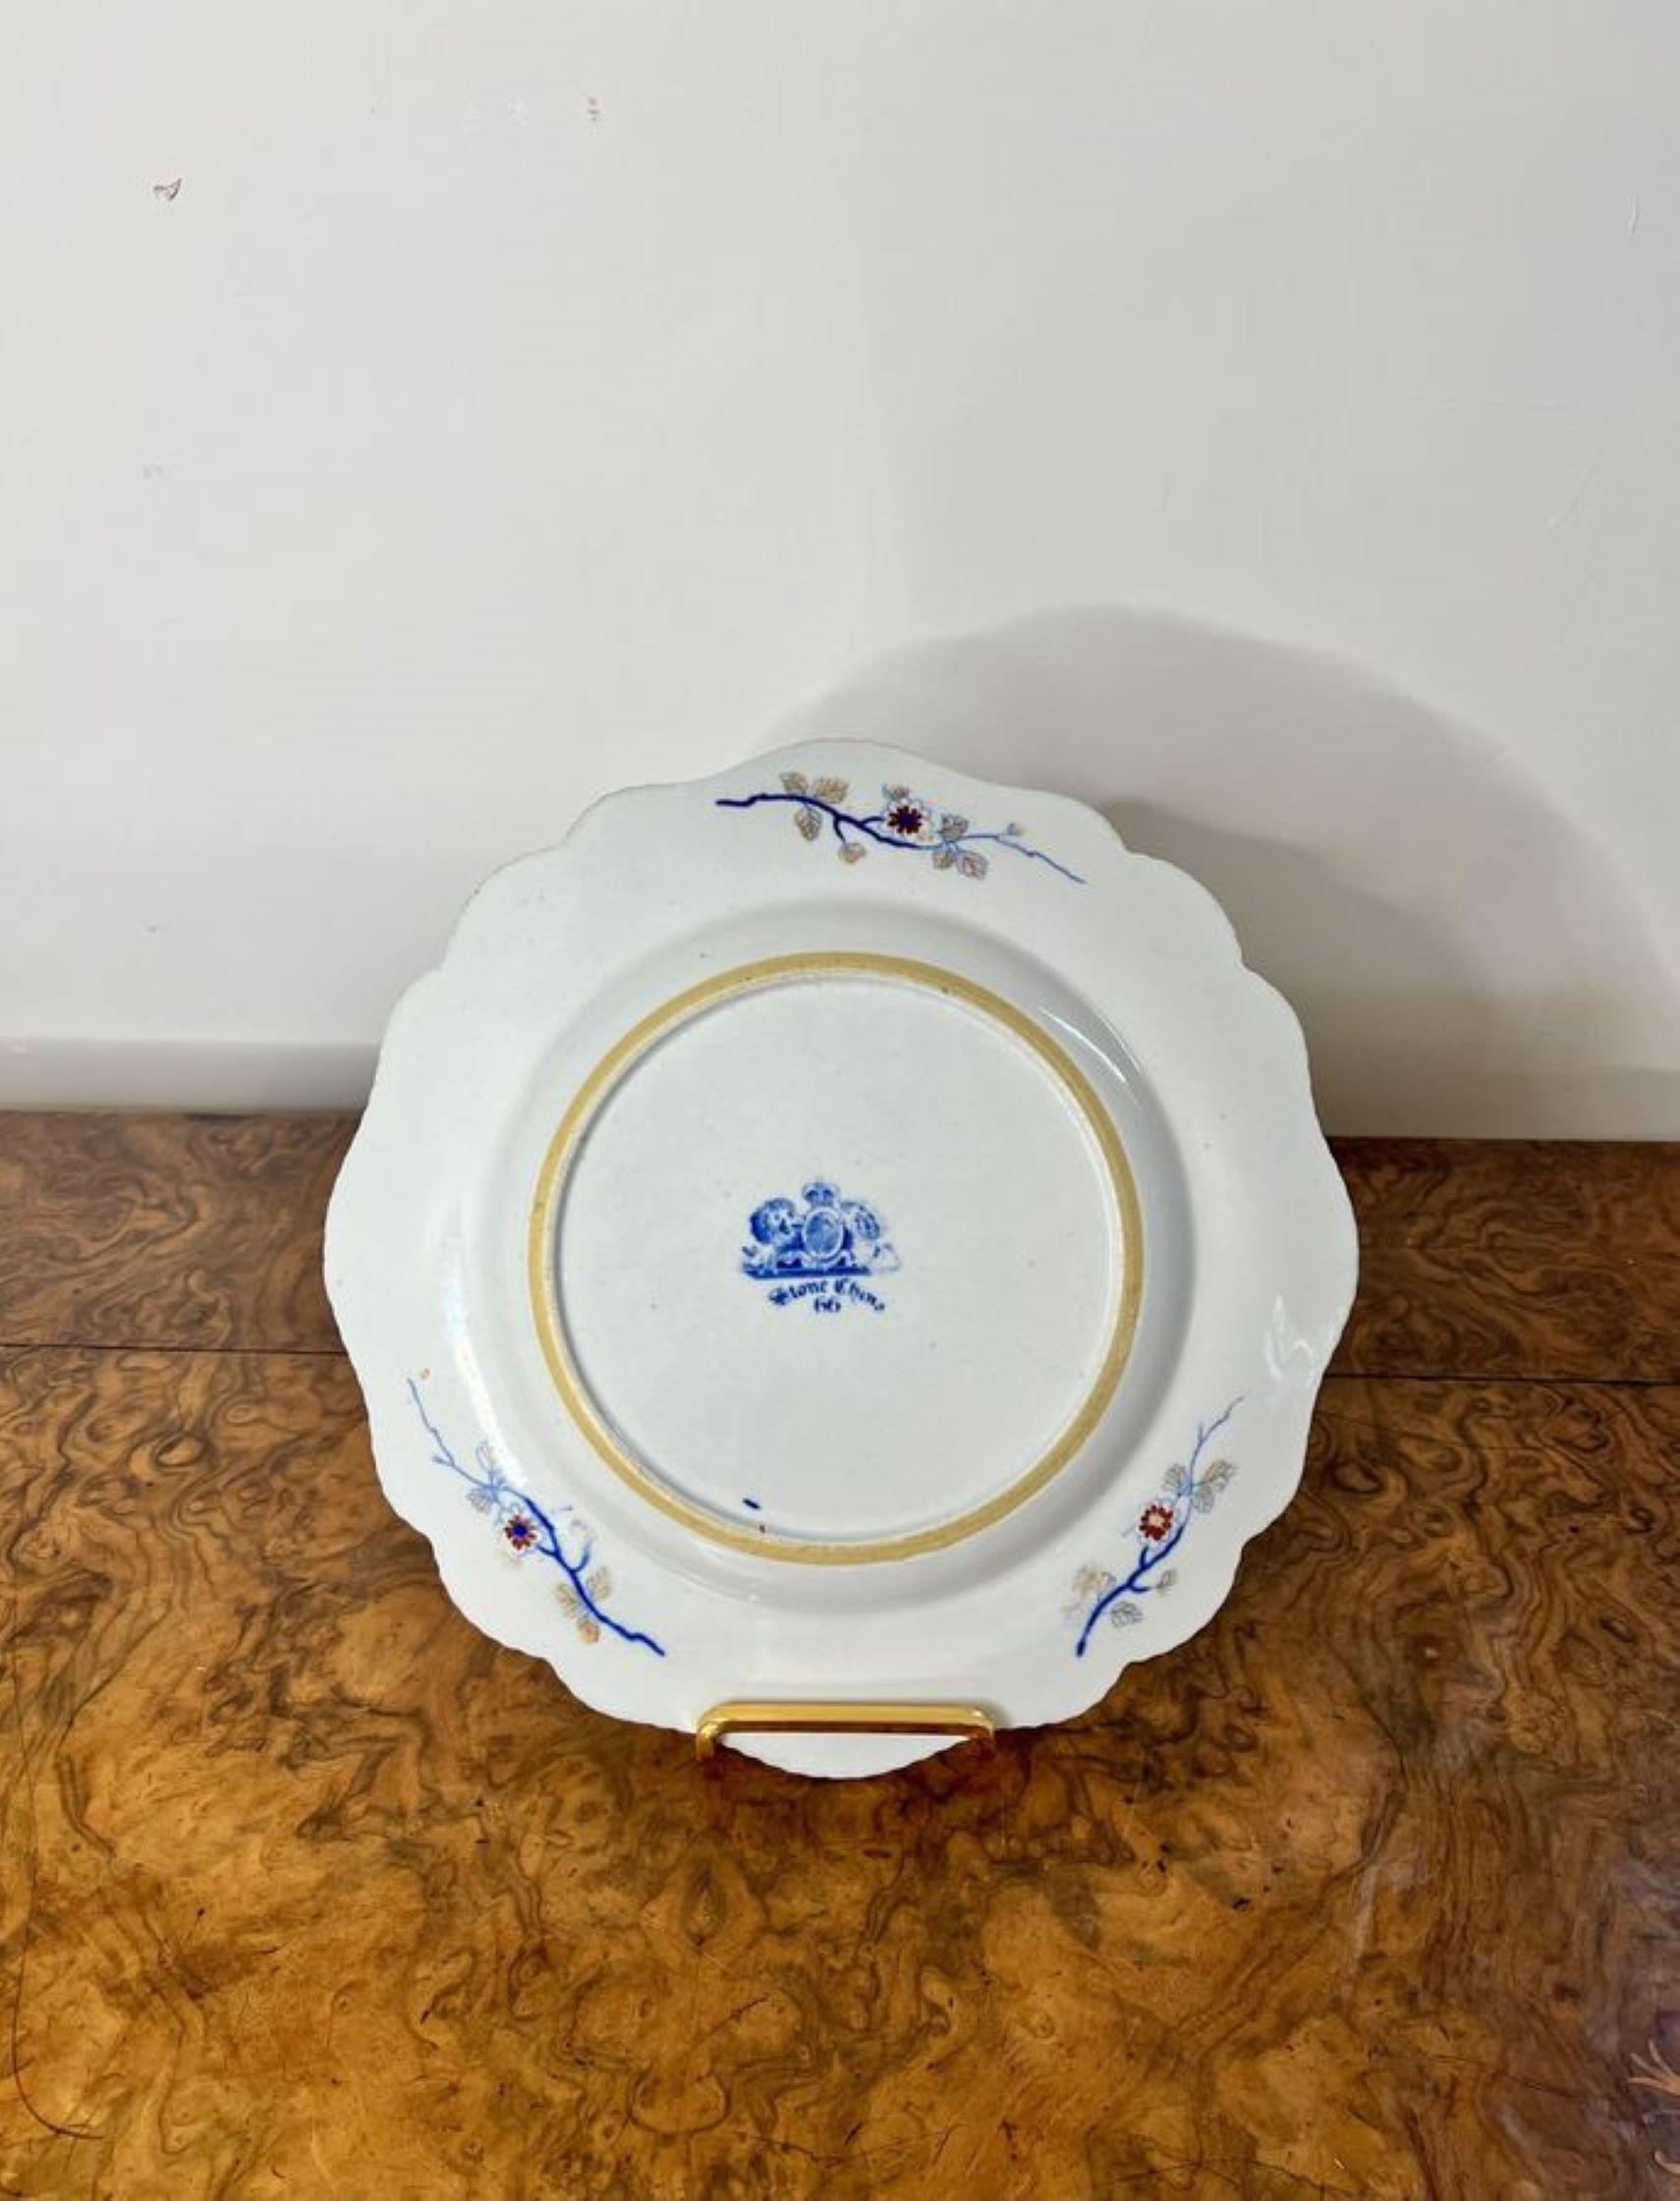 Wonderful pair of antique Georgian stone china plates, having a fantastic shaped edge, decorated in an authentic imari style pattern with flowers, leaves and scrolls hand painted in red, blue, gold and white colours. 
Stamped to bases as shown '